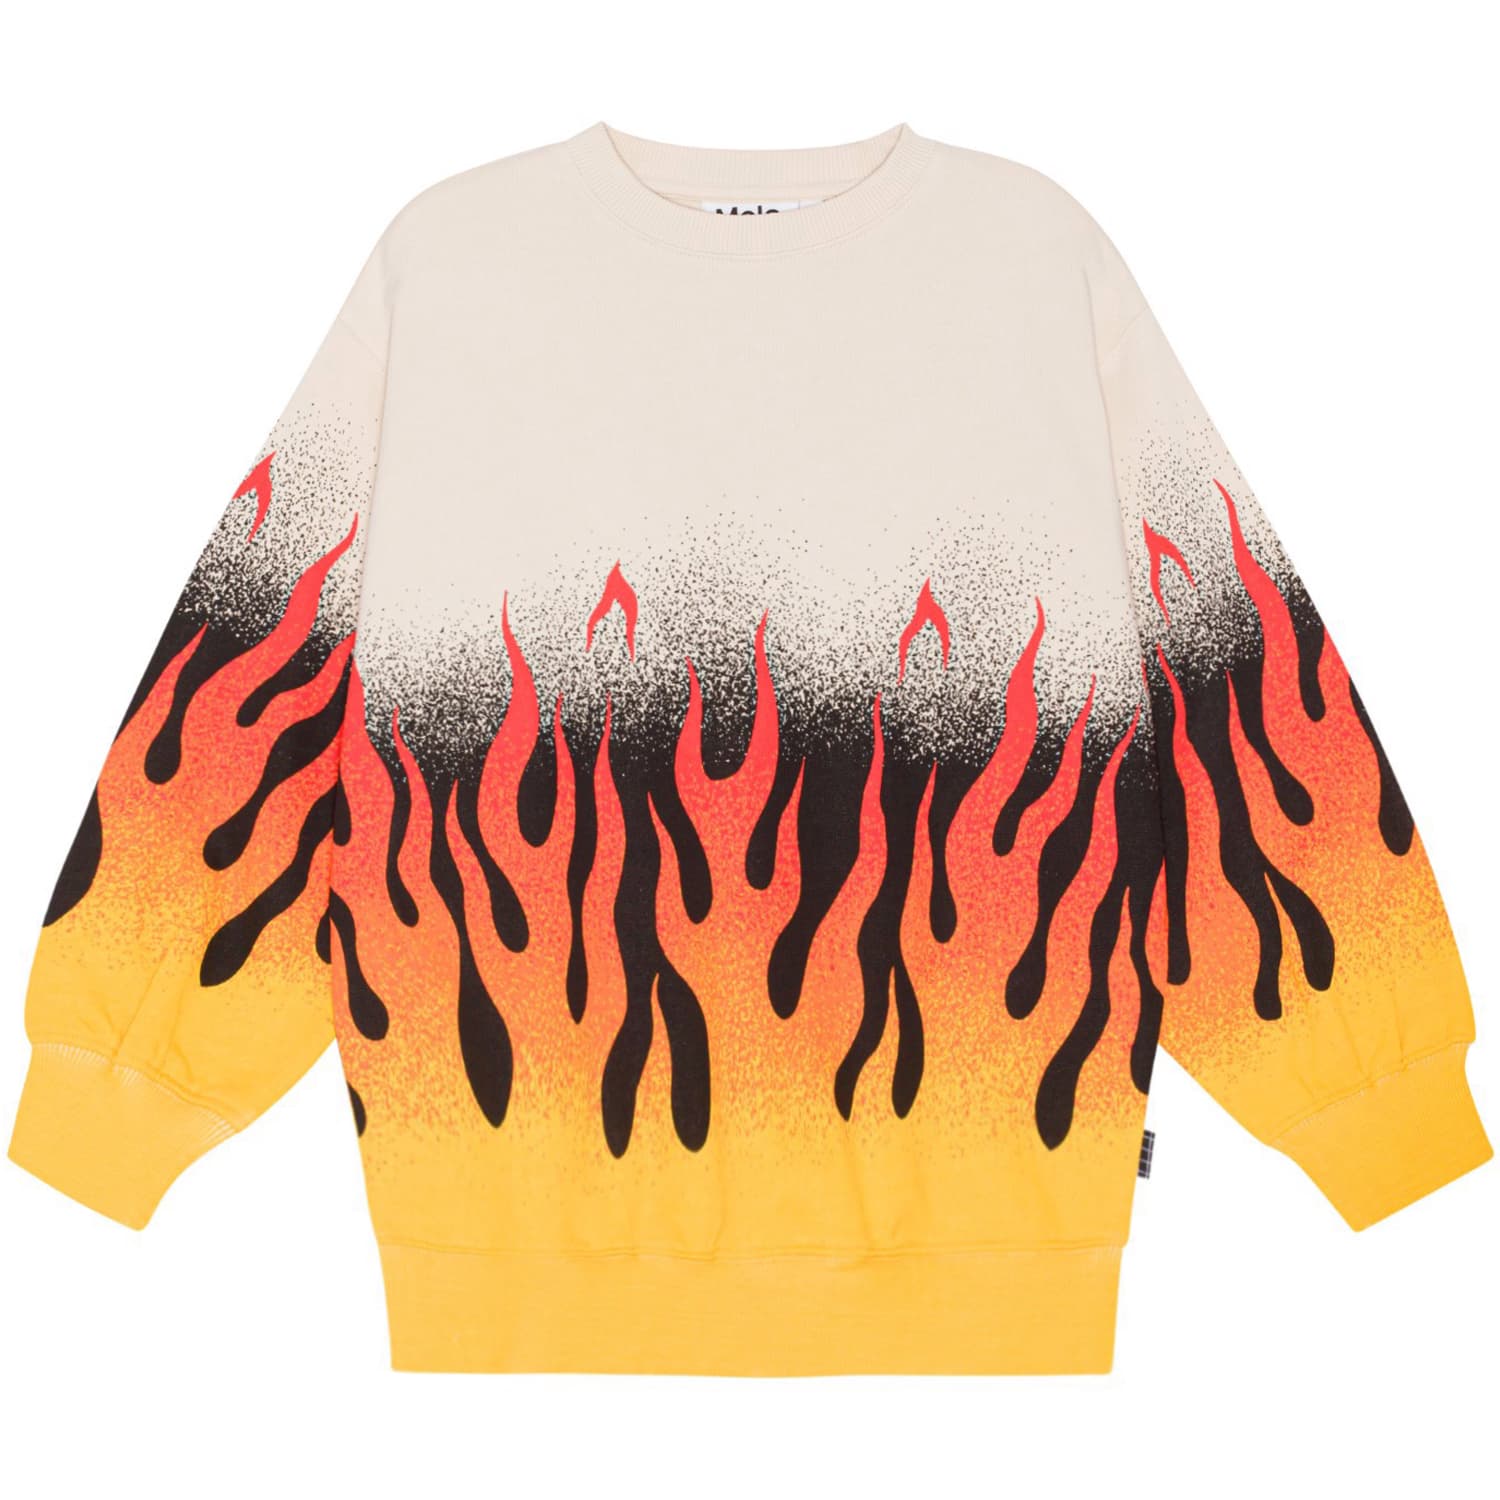 Monti Sweater (On Fire)